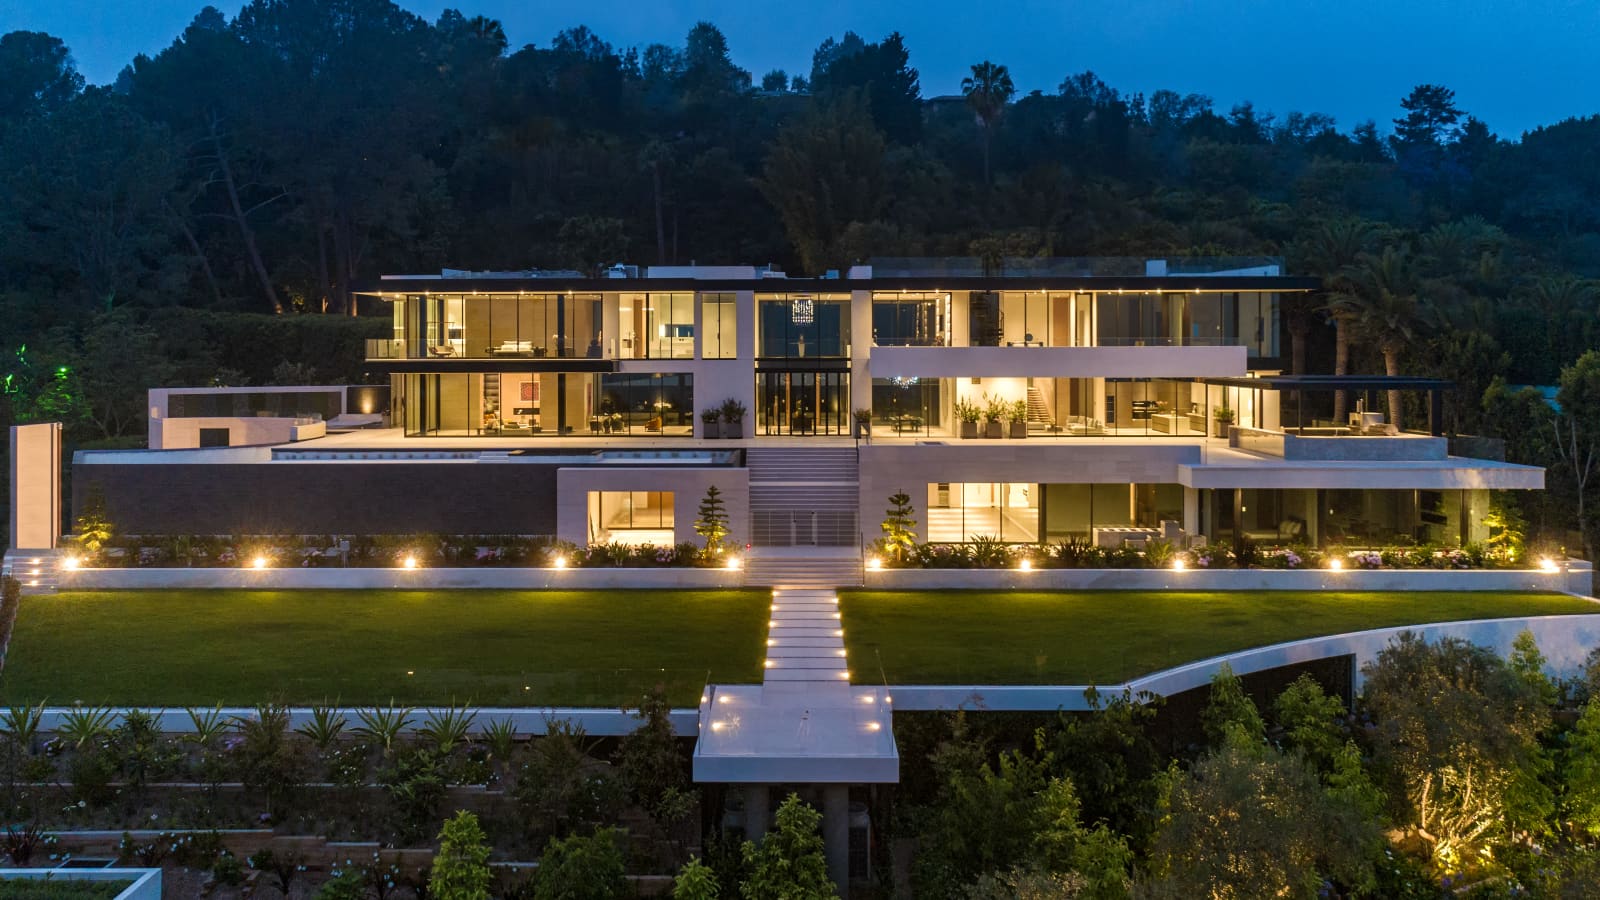 Photos: Inside the most expensive rental property in US